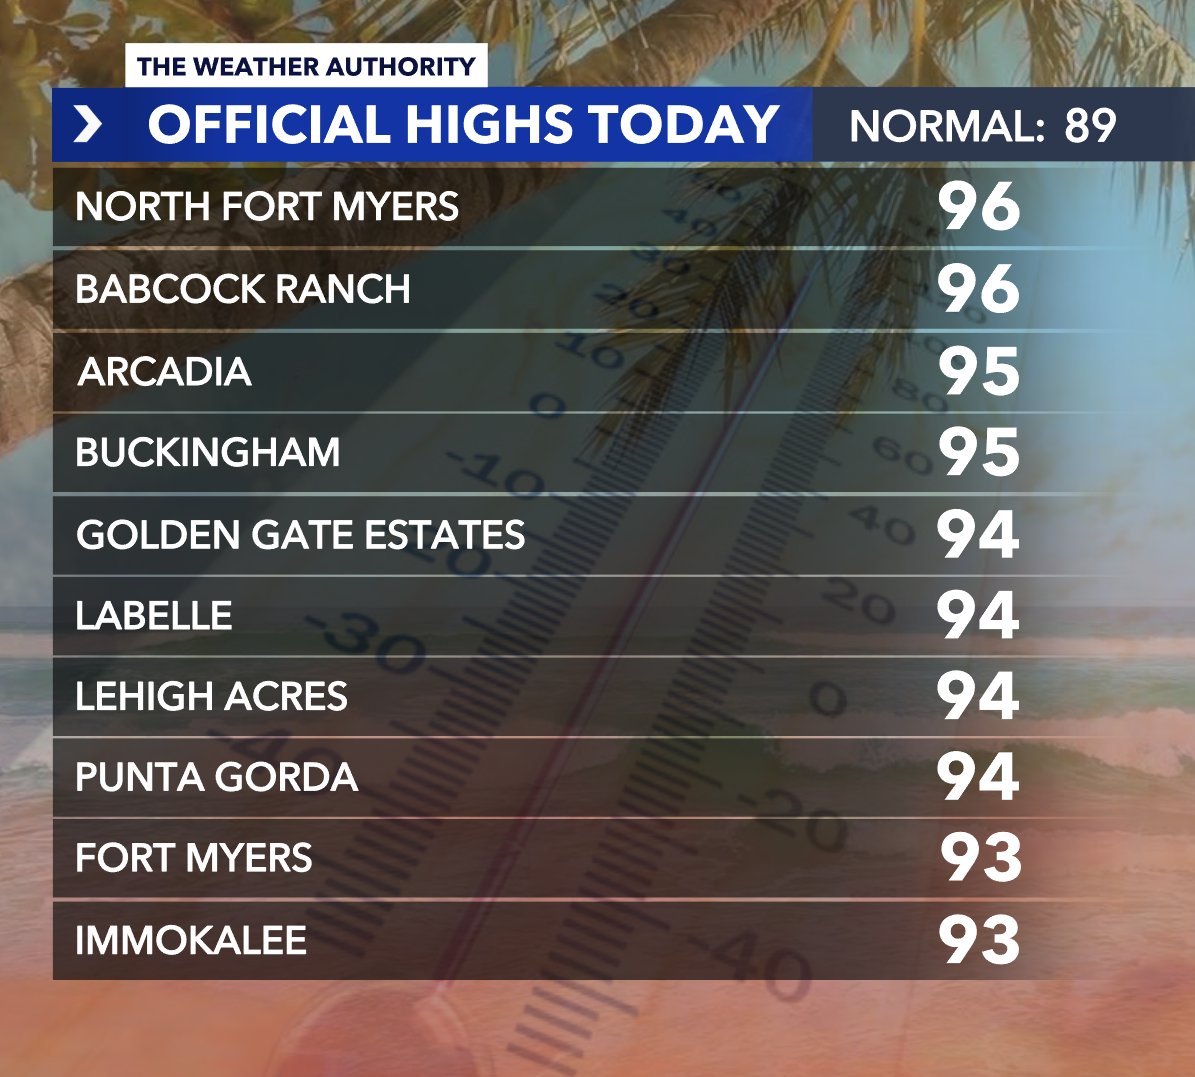 HIGHS TODAY reached the mid 90s for many inland communities in Southwest Florida! 🔥 @WINKNews